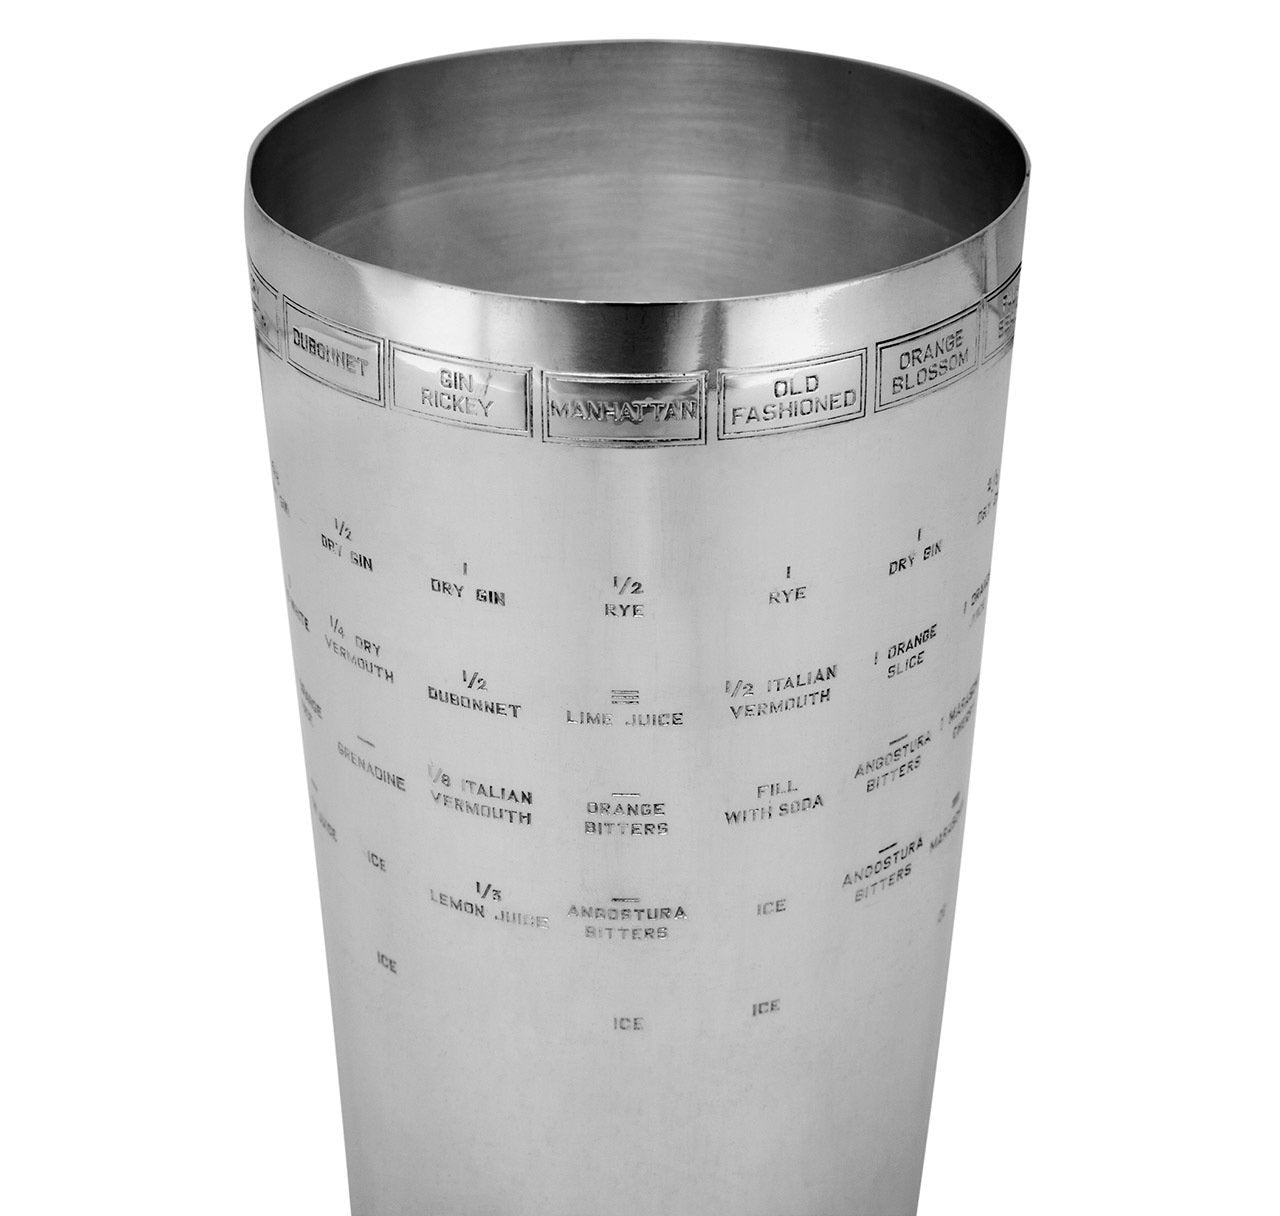 Napier "Tells You How" Recipe Silver-Plated Cocktail Shaker